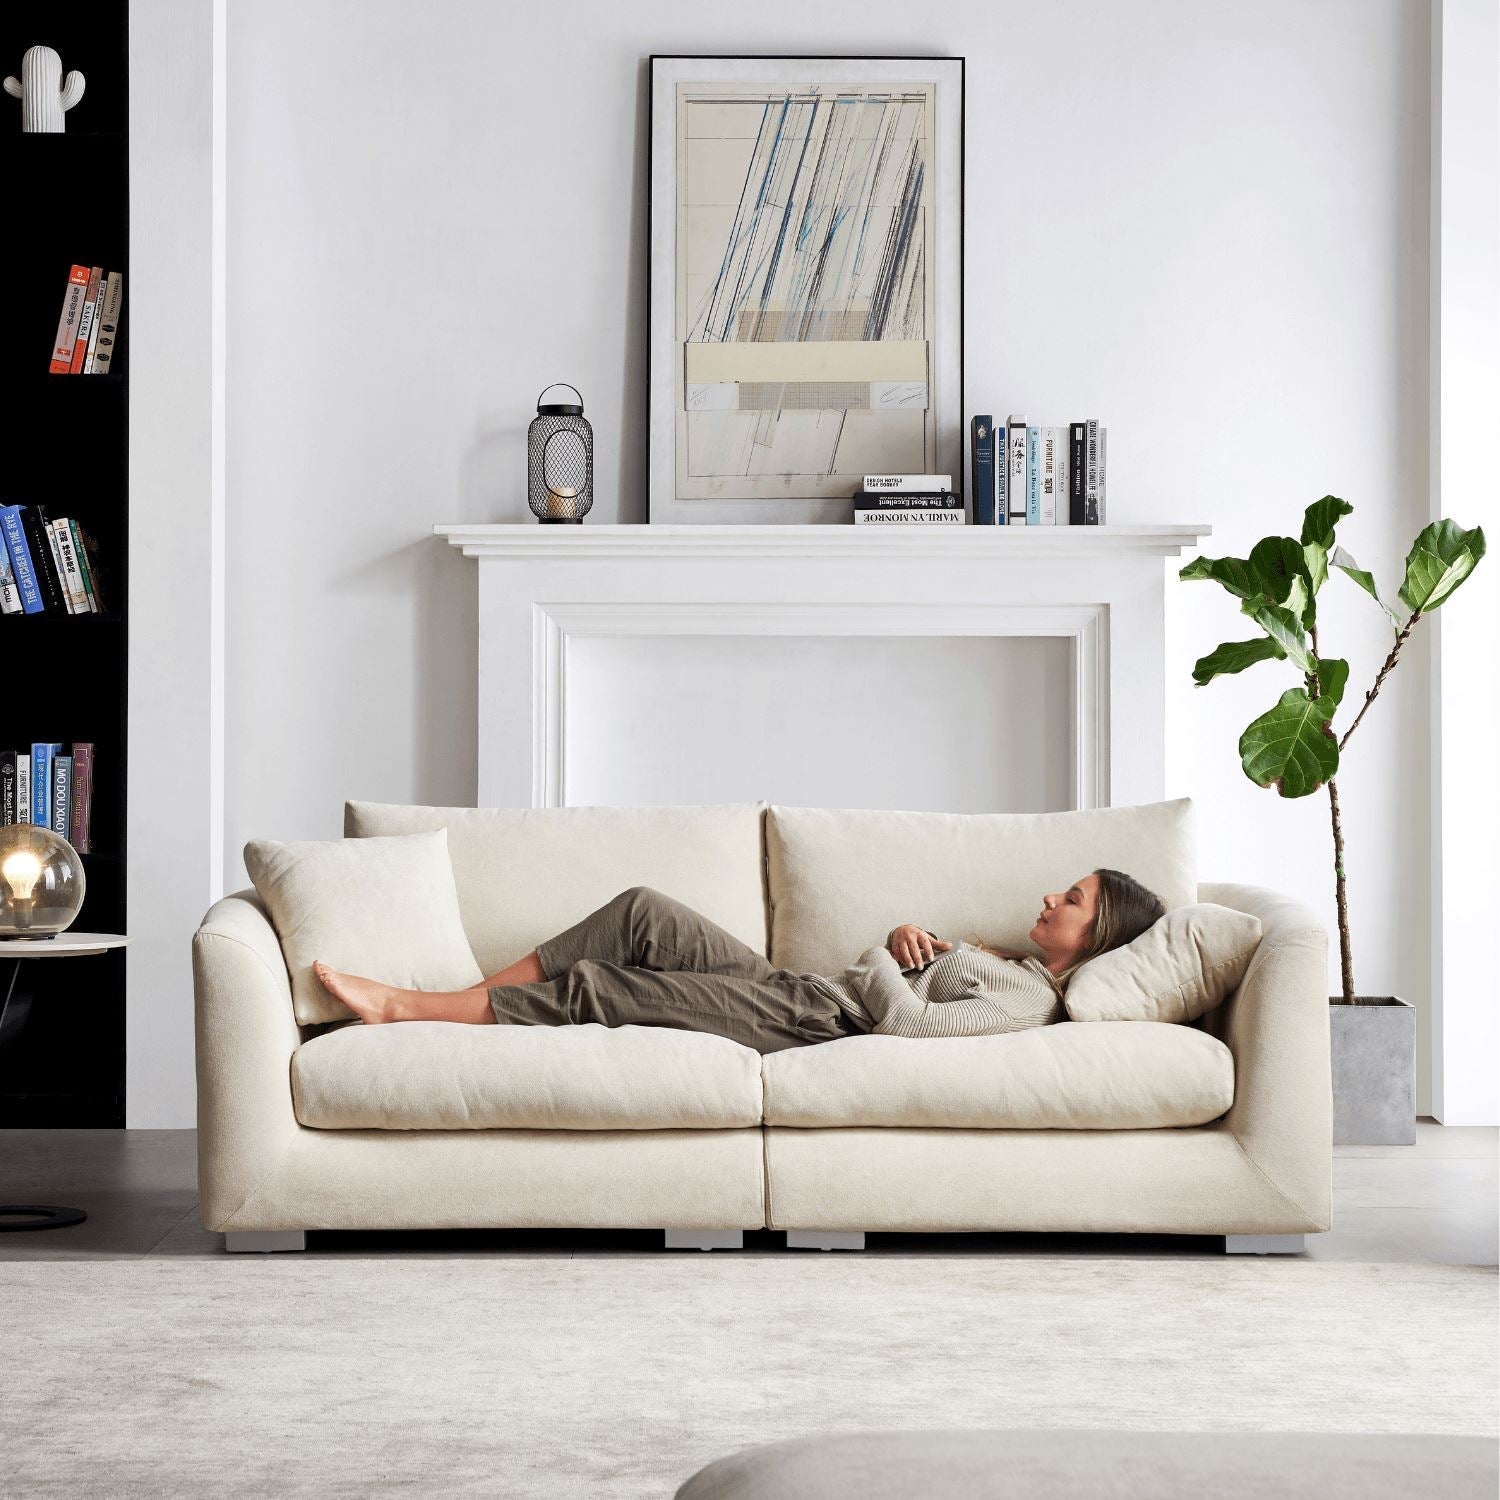 Feathers Sofa 3 Seater / Beige